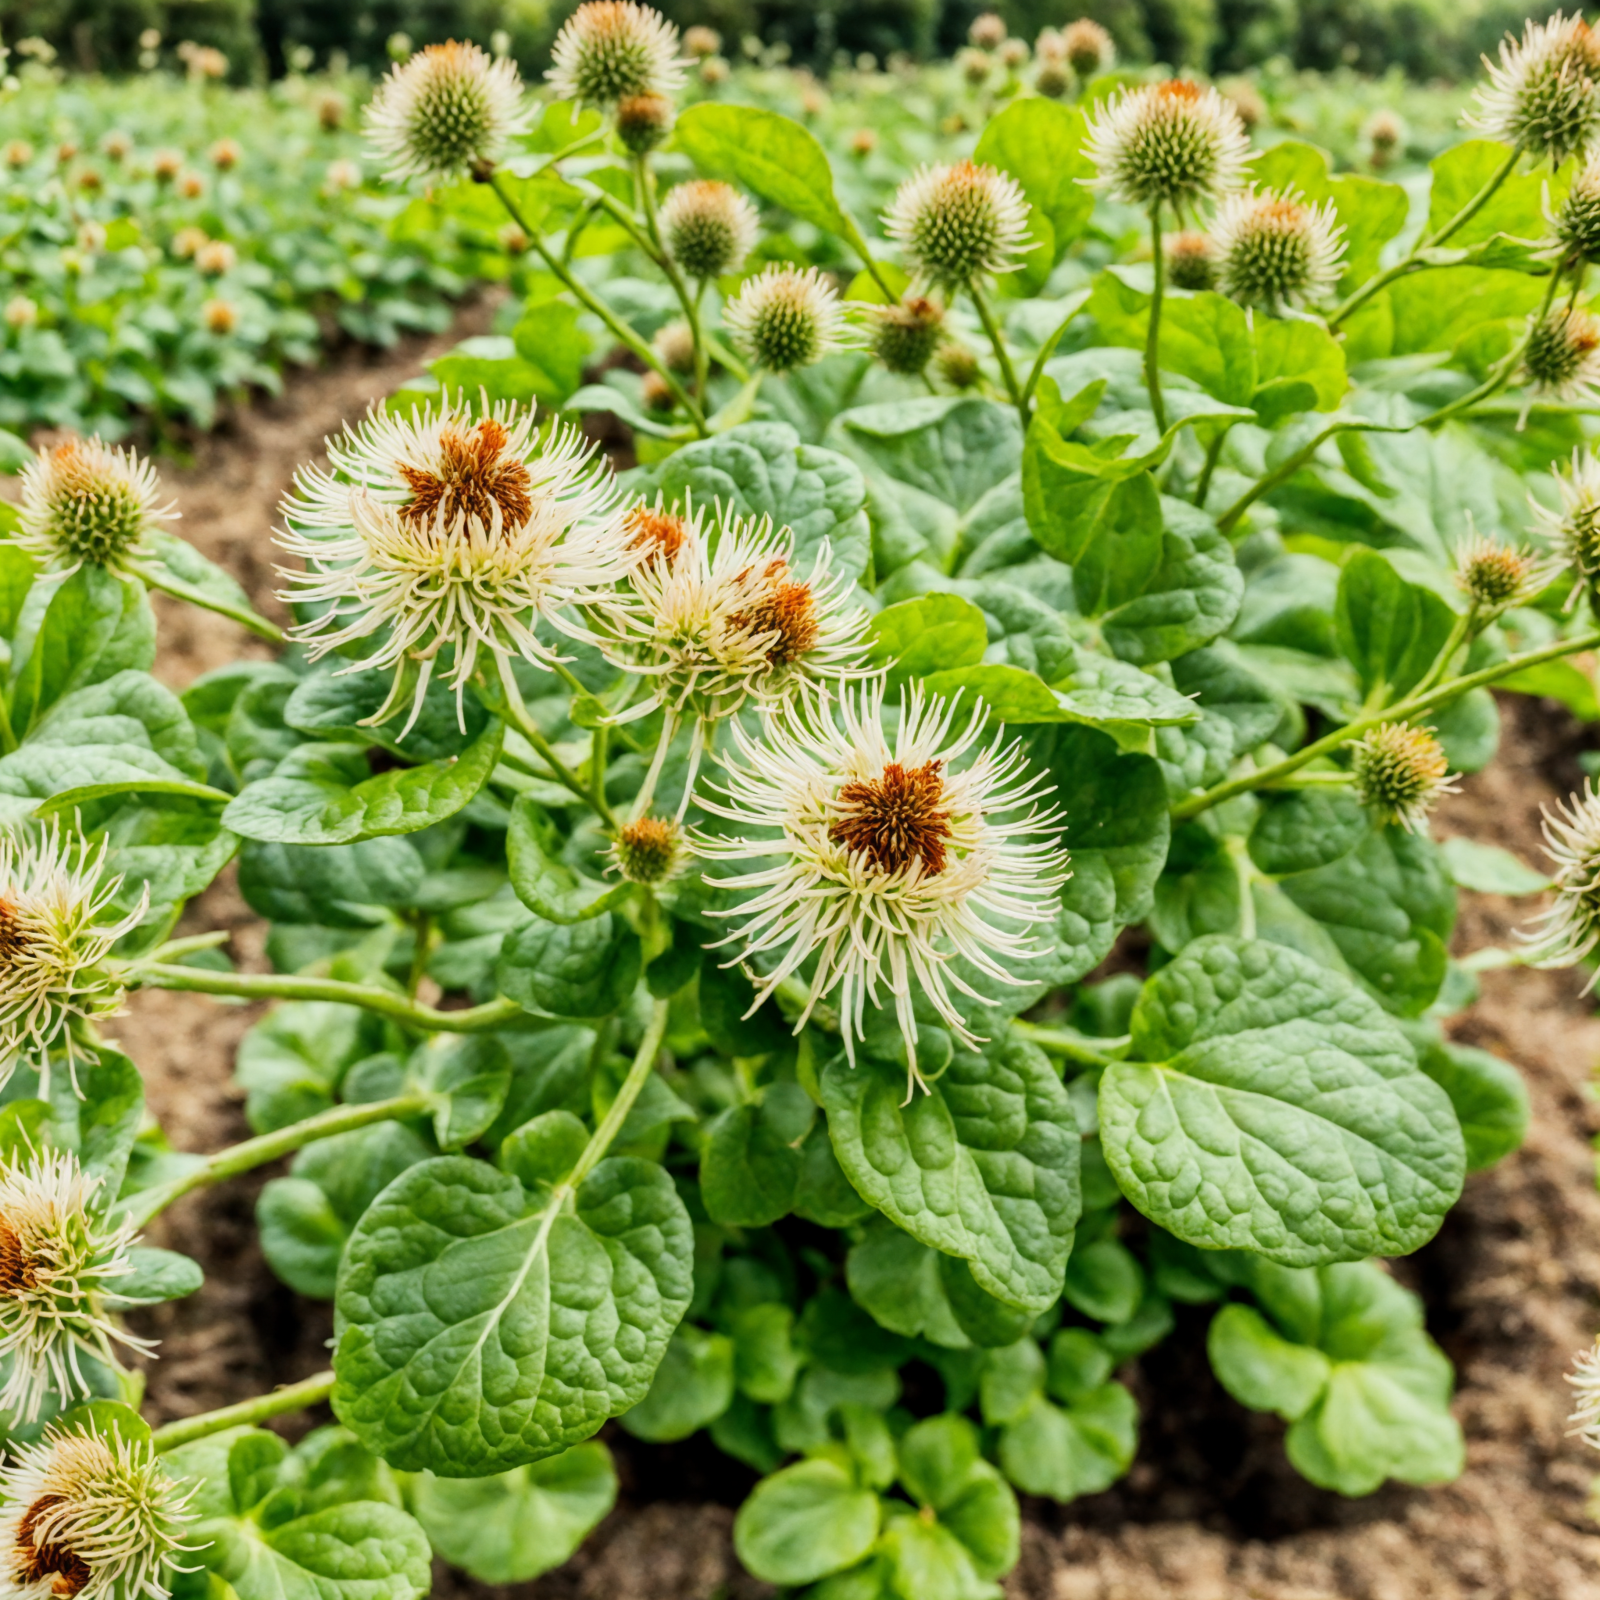 A cluster of Arctium lappa (burdock) flowers in soil, with foliage in a park setting, soft daylight, panoramic view.